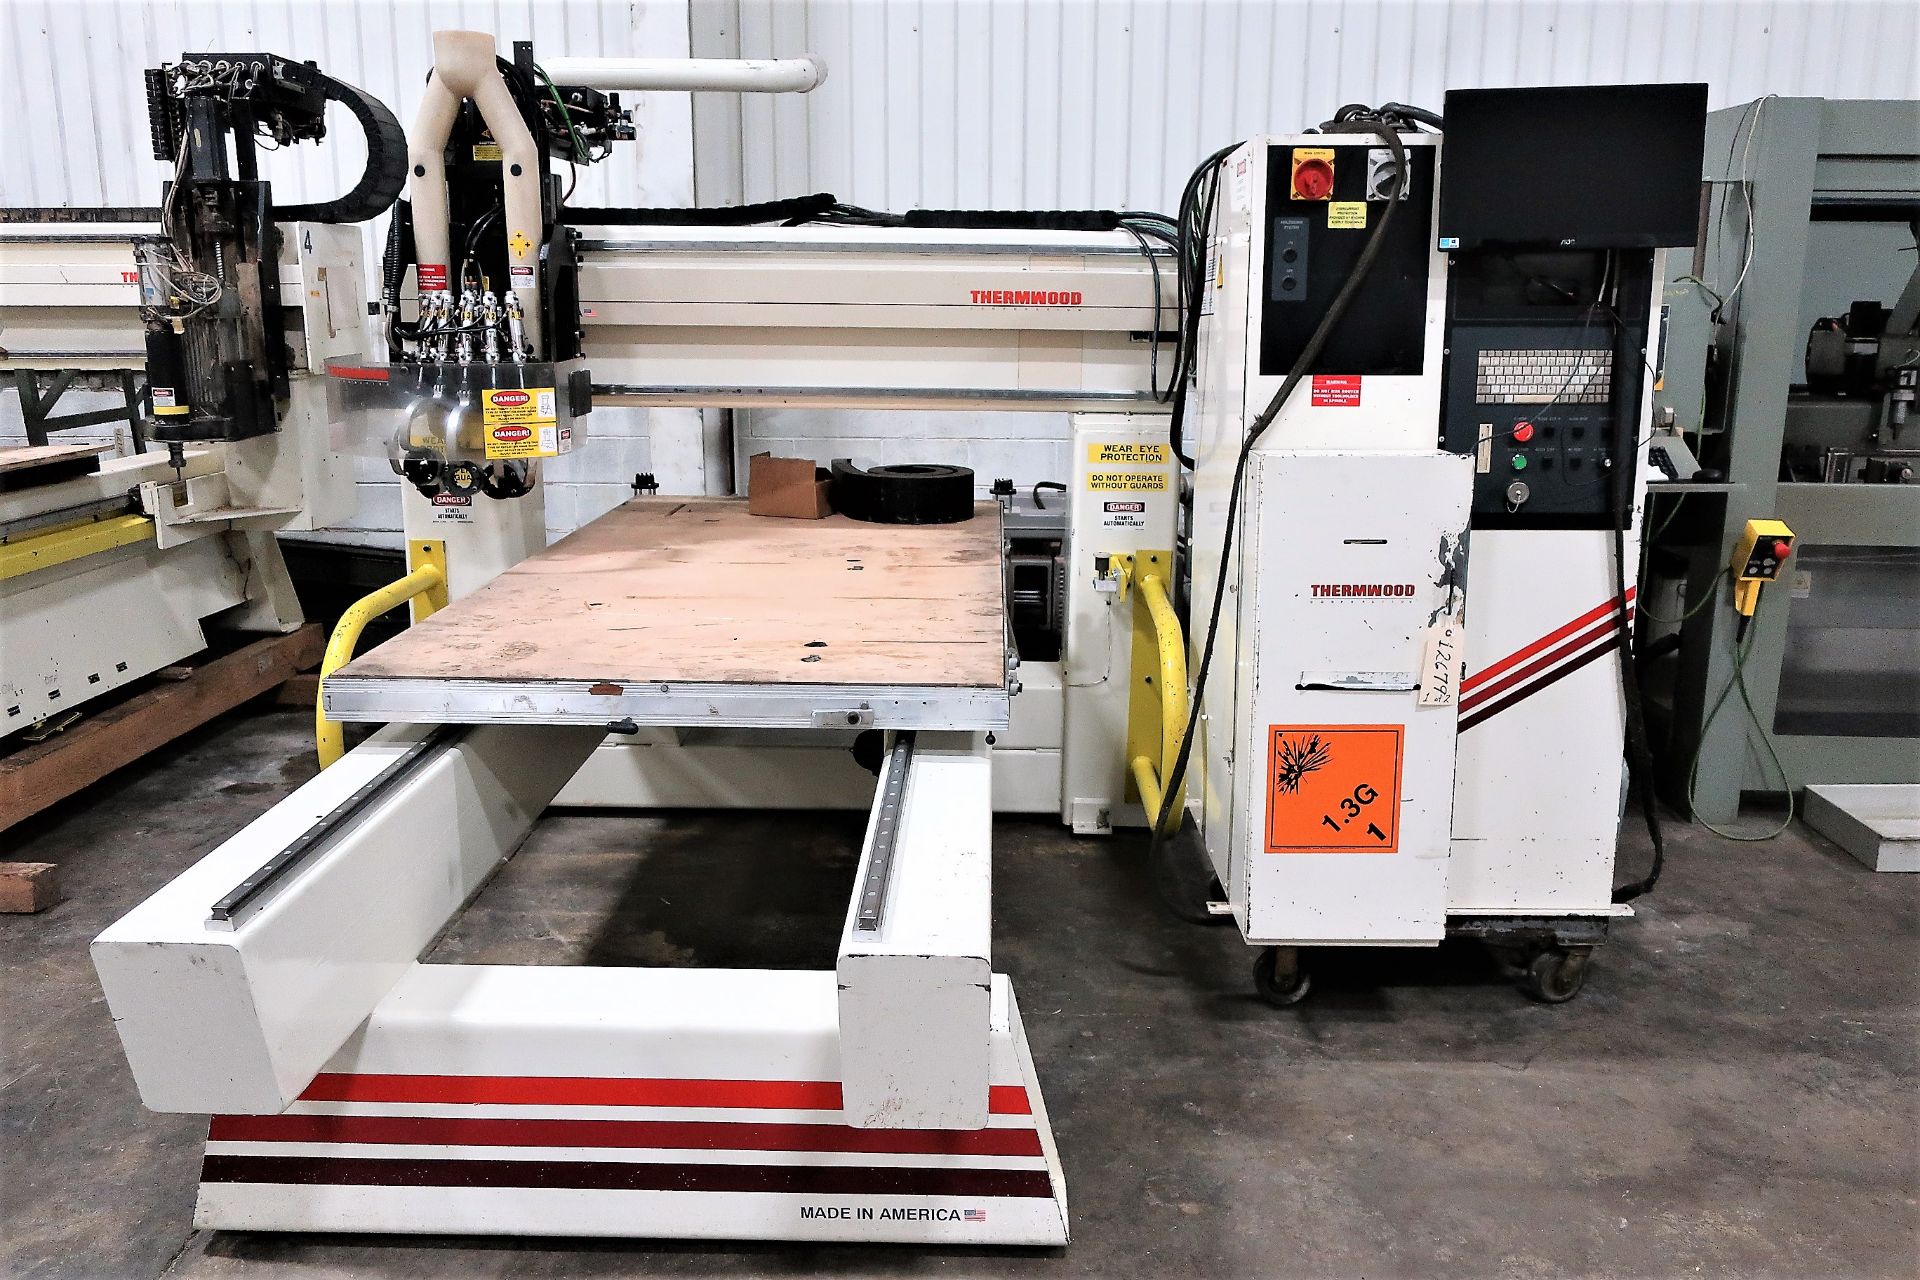 4'X8' THERMWOOD C40 3-AXIS CNC ROUTER, S/N CS400430904, NEW 2004